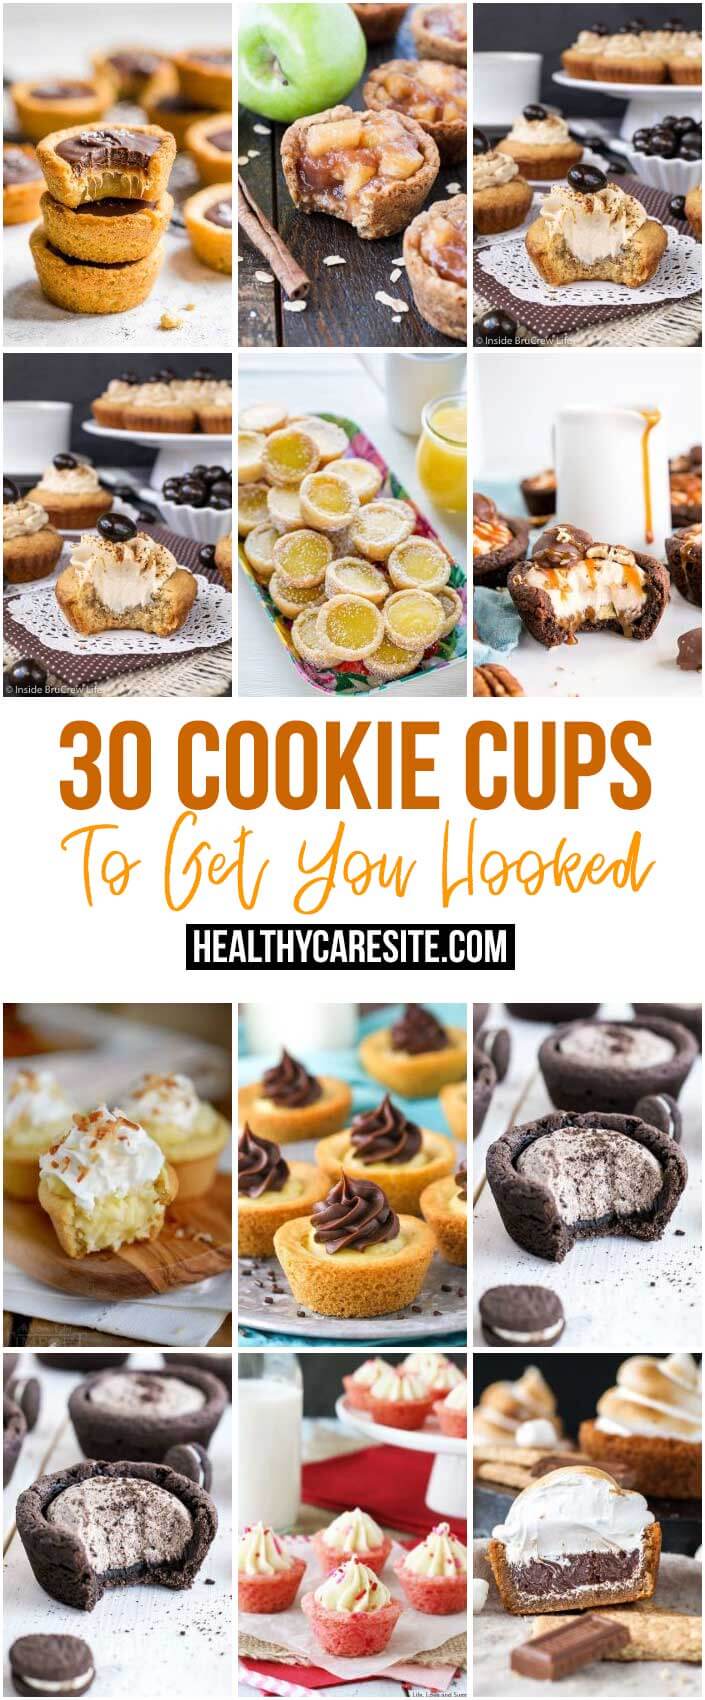 30 Cookie Cups To Get You Hooked